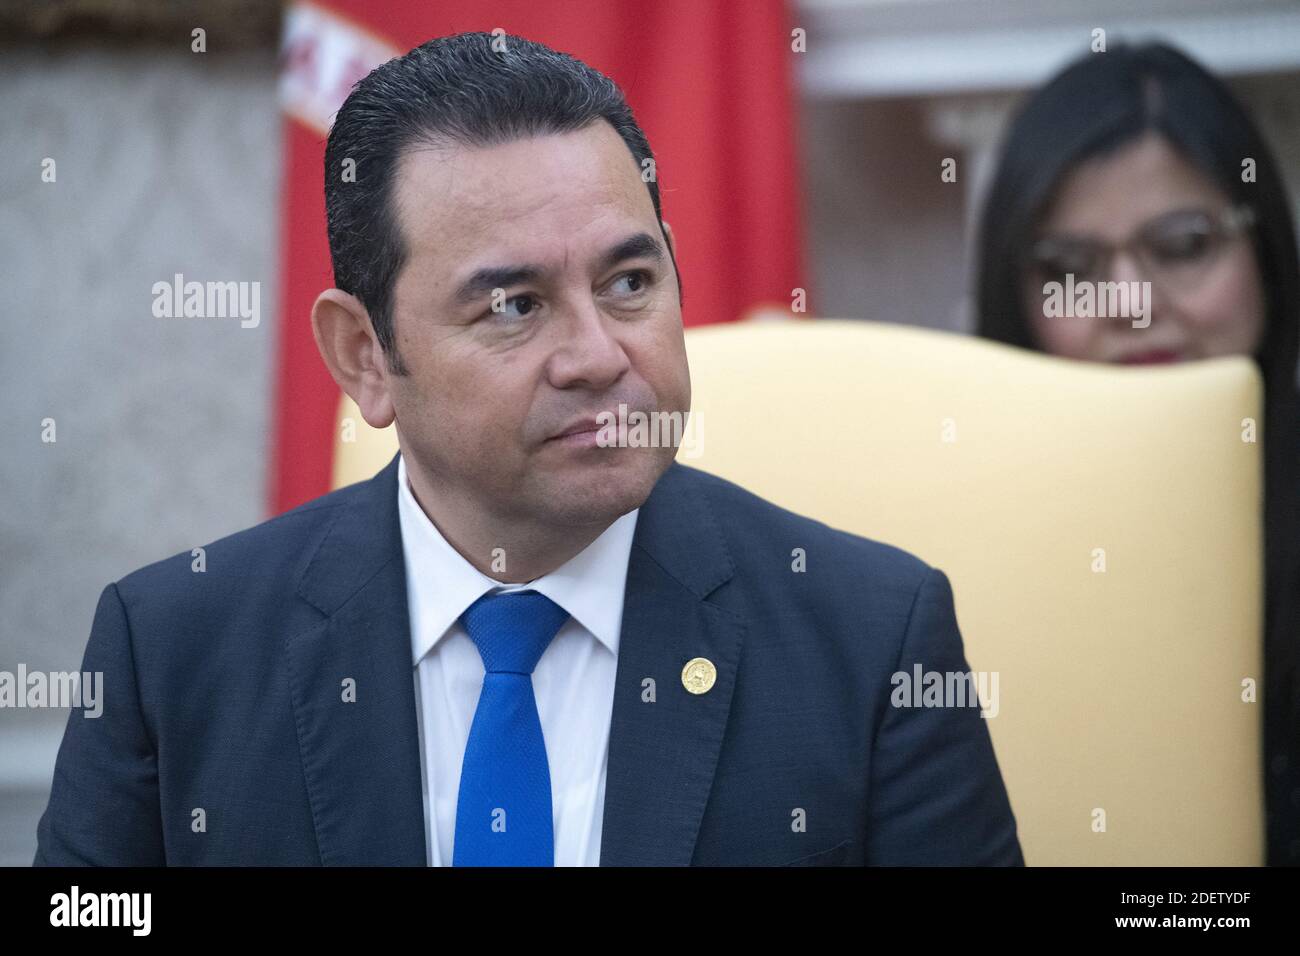 President Jimmy Morales of the Republic of Guatemala listens as United States President Donald J. Trump makes remarks welcoming him to the Oval Office of the White House in Washington, DC on Tuesday, December 17, 2019. Photo by Ron Sachs/CNP/ABACAPRESS.COM Stock Photo